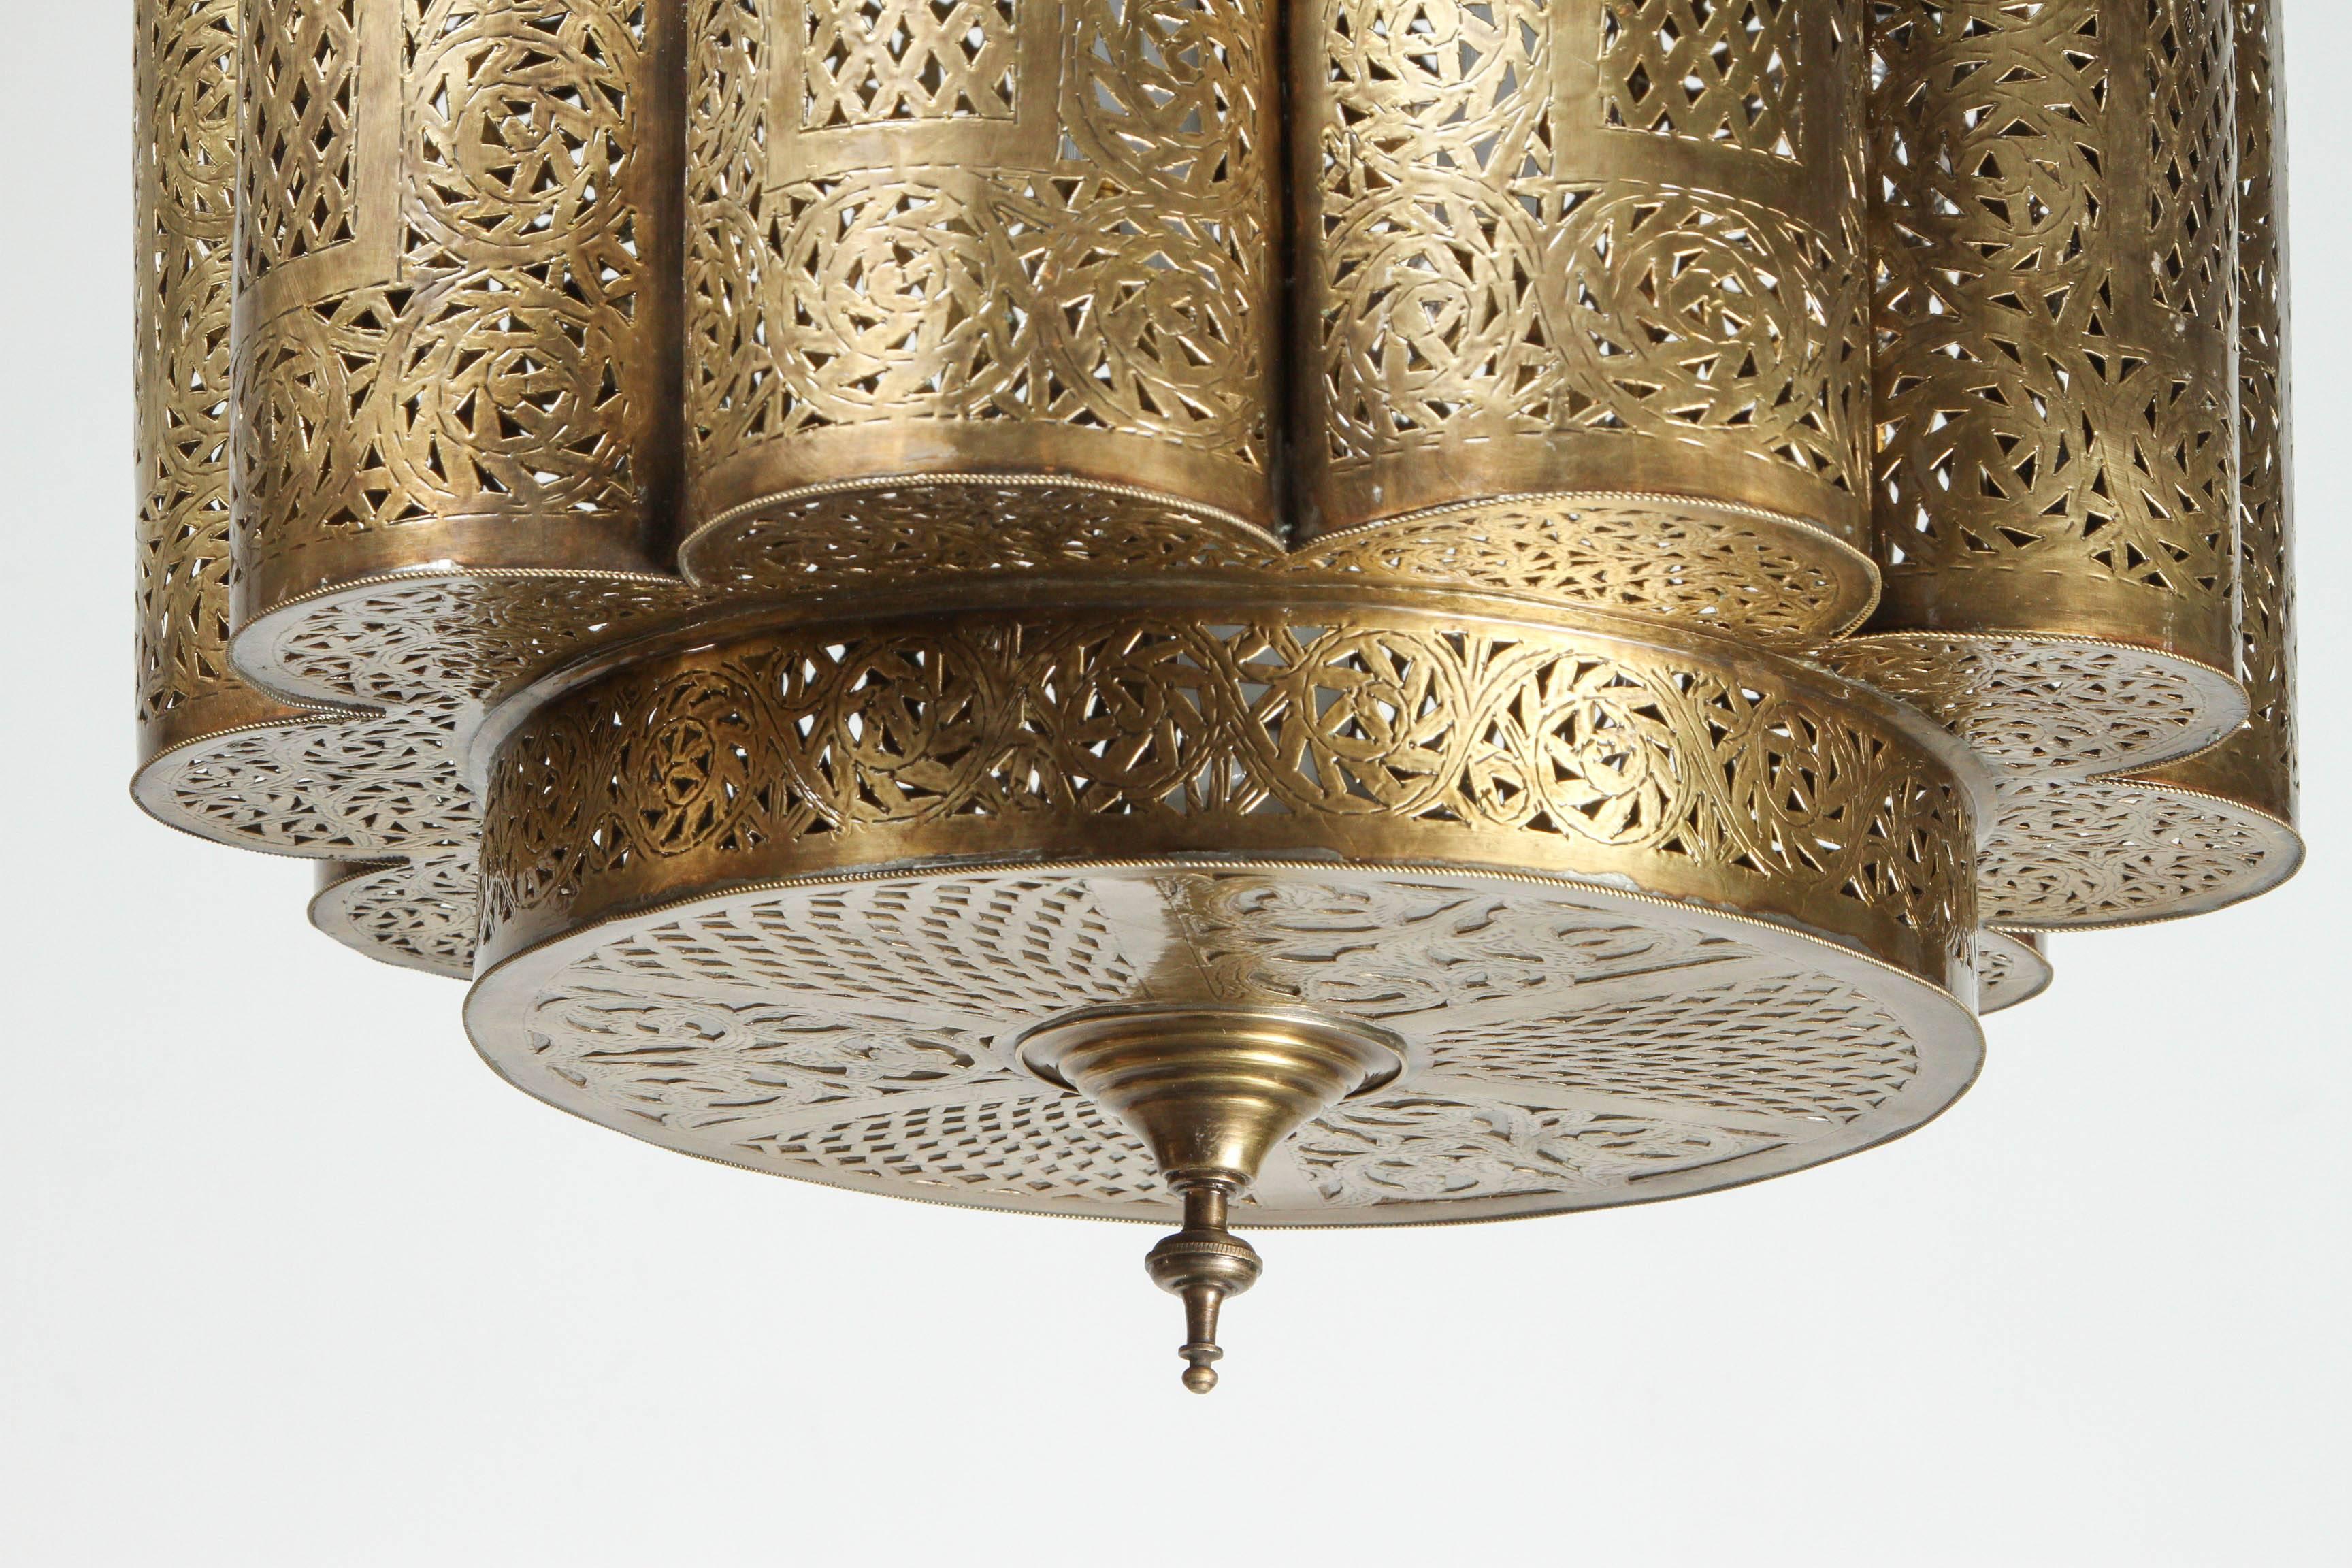 Large brass Moroccan chandelier in the style of Alberto Pinto design.
This Moorish light fixture is delicately handcrafted, hand-hammered and chiselled with fine Moorish filigree designs by skilled Moroccan artisans.
Measure: The size of the light